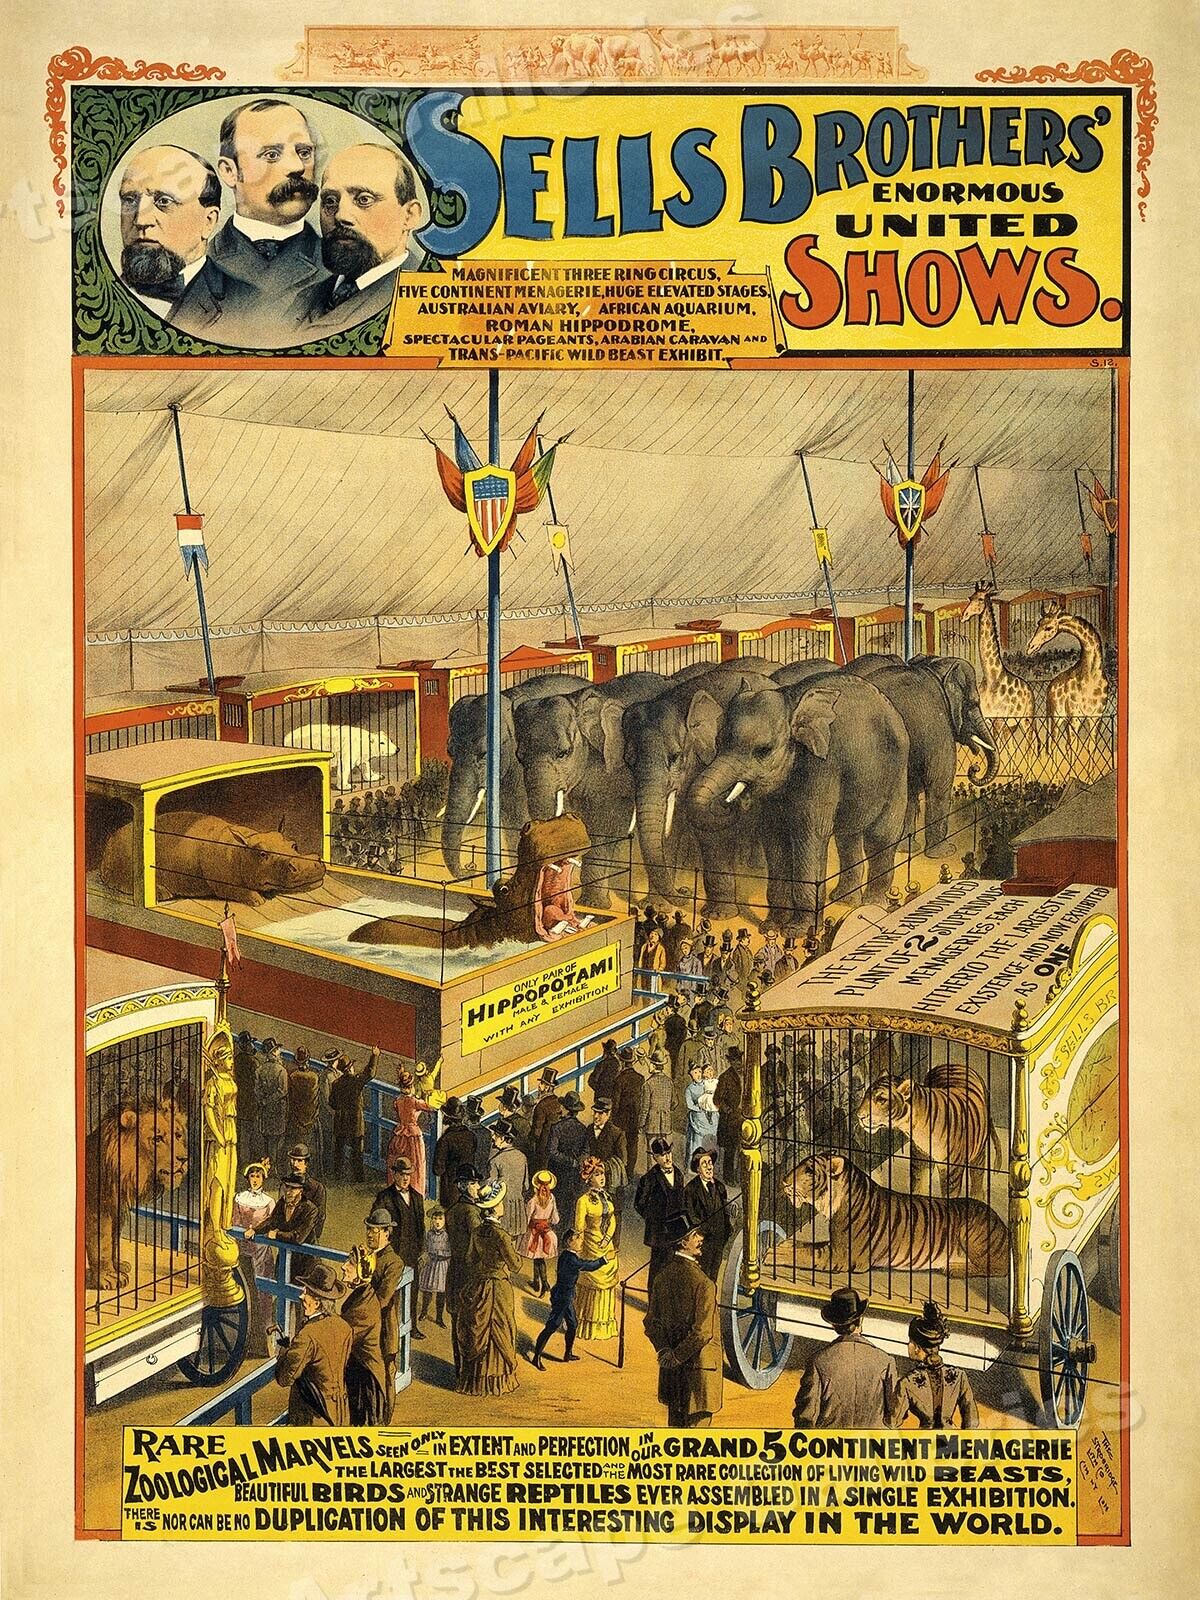 1895 Sells Brothers Shows Zoological Marvels Circus Poster - 24x32